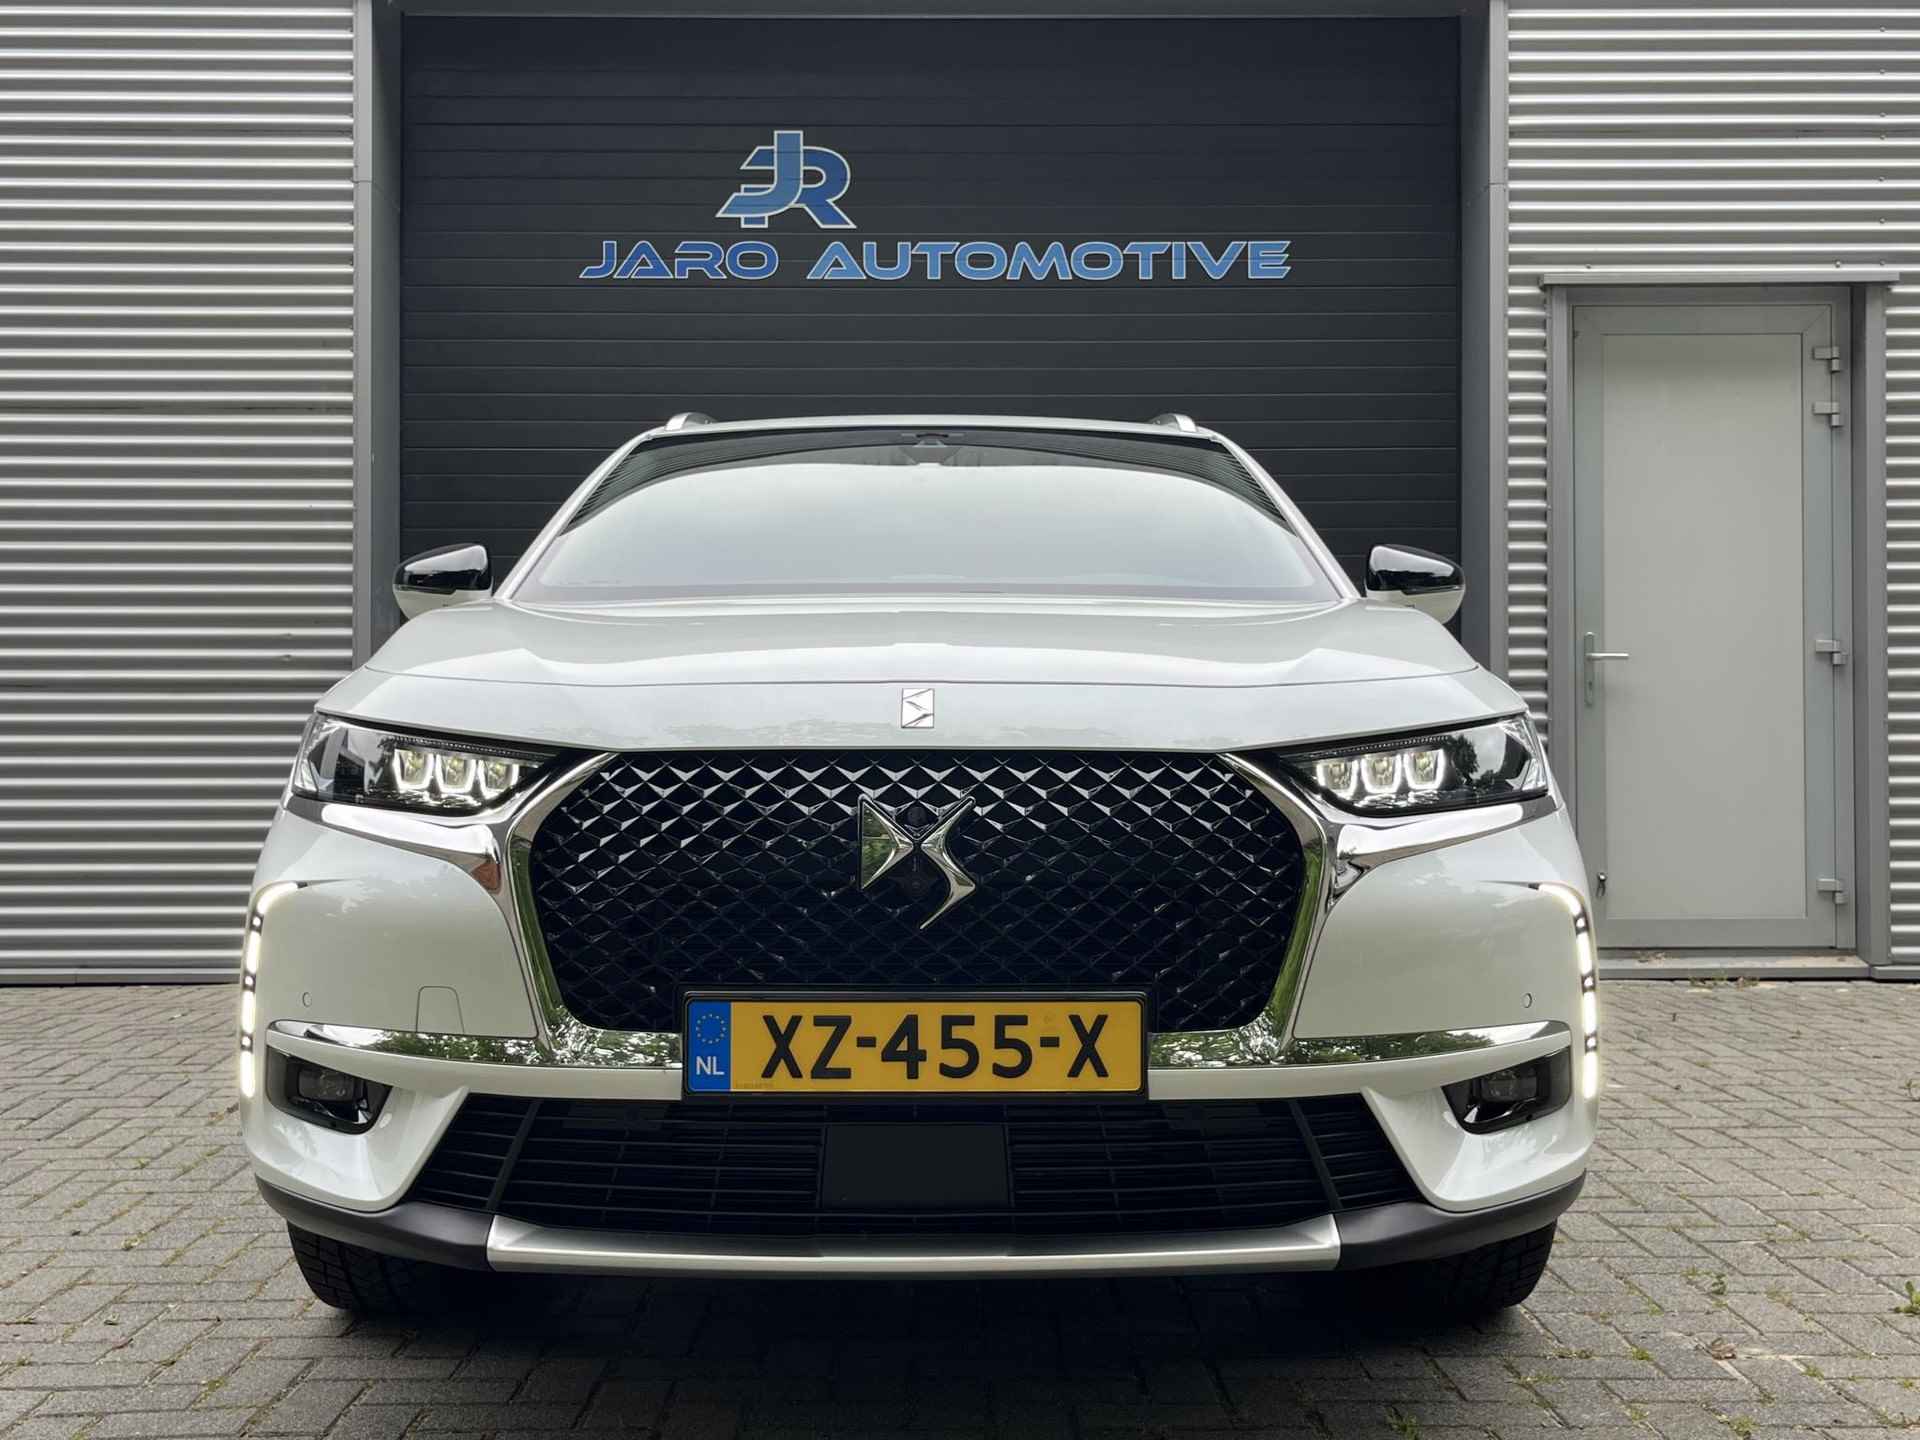 DS 7 Crossback 1.6 PureTech So Chic Full options - 61/91